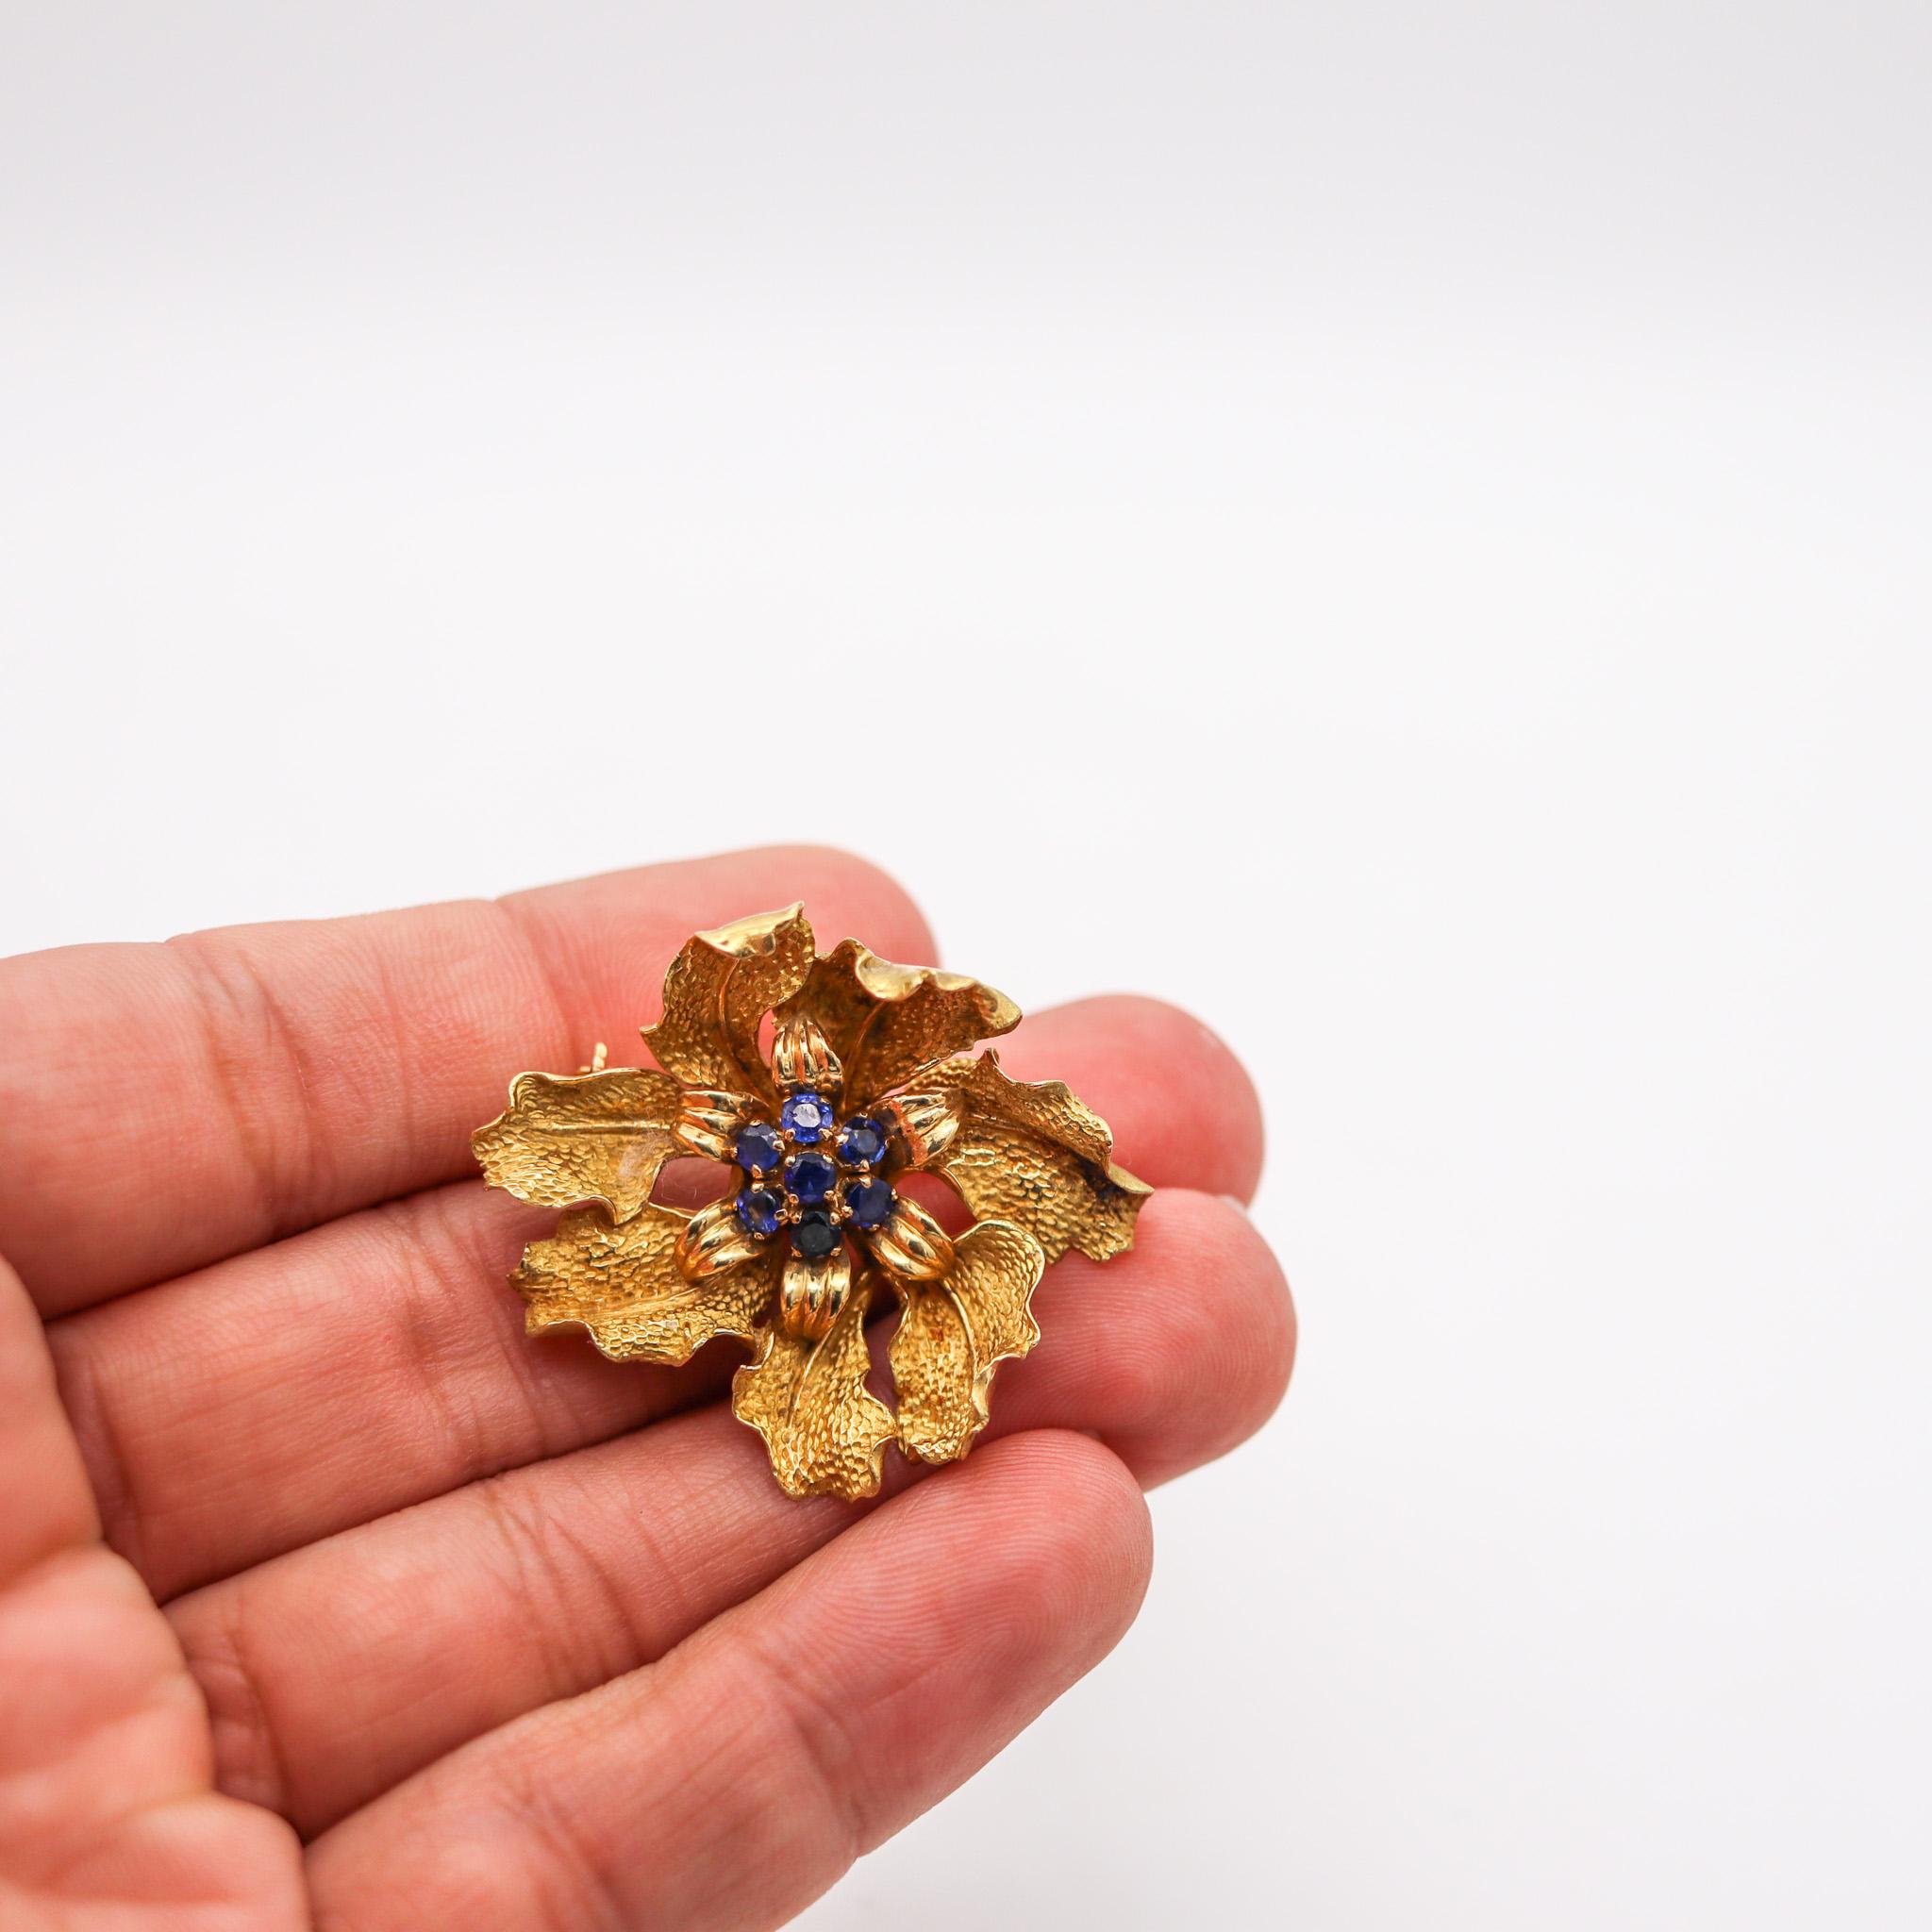 Sculptural brooch designed by Tiffany & Co.

Beautiful vintage piece, created by the Tiffany studios back in the 1960. This retro-modernist brooch has been designed with organic motifs in the shape of an orchid flower. Crafted in solid rich yellow